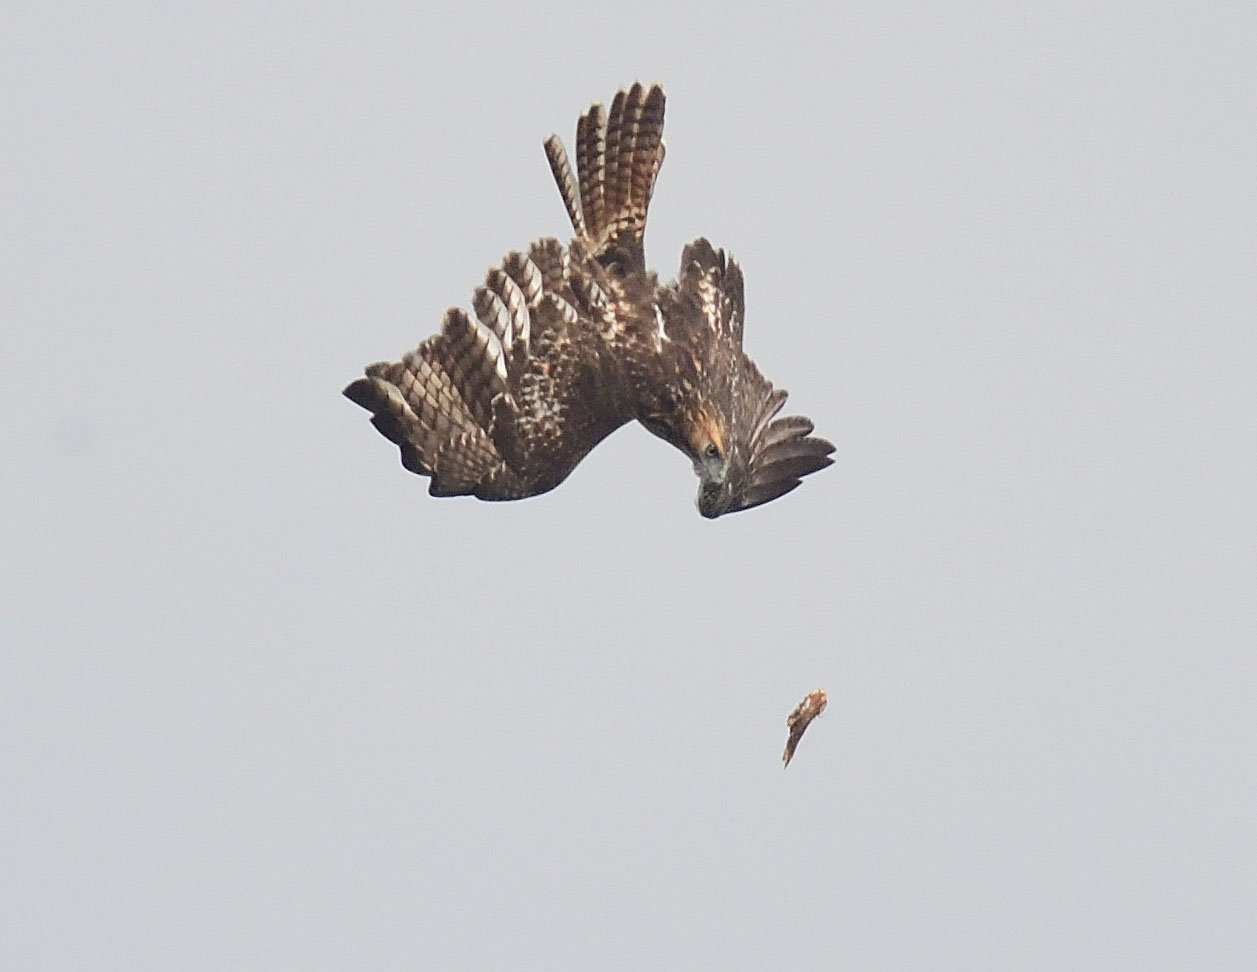 Along with the tail going up (this works similar to the elevator on an aircraft: elevator goes up, the nose goes up), the hawk has positioned its wings upward to dump some lift. The wings are now acting as a speed brake and, evidenced by the mussed-up feathers, the air above the wings is roiled and turbulent. A look at the right foot reveals the aerobatics show was a success; the prized piece of wood is firmly clenched in the youngster’s talons.